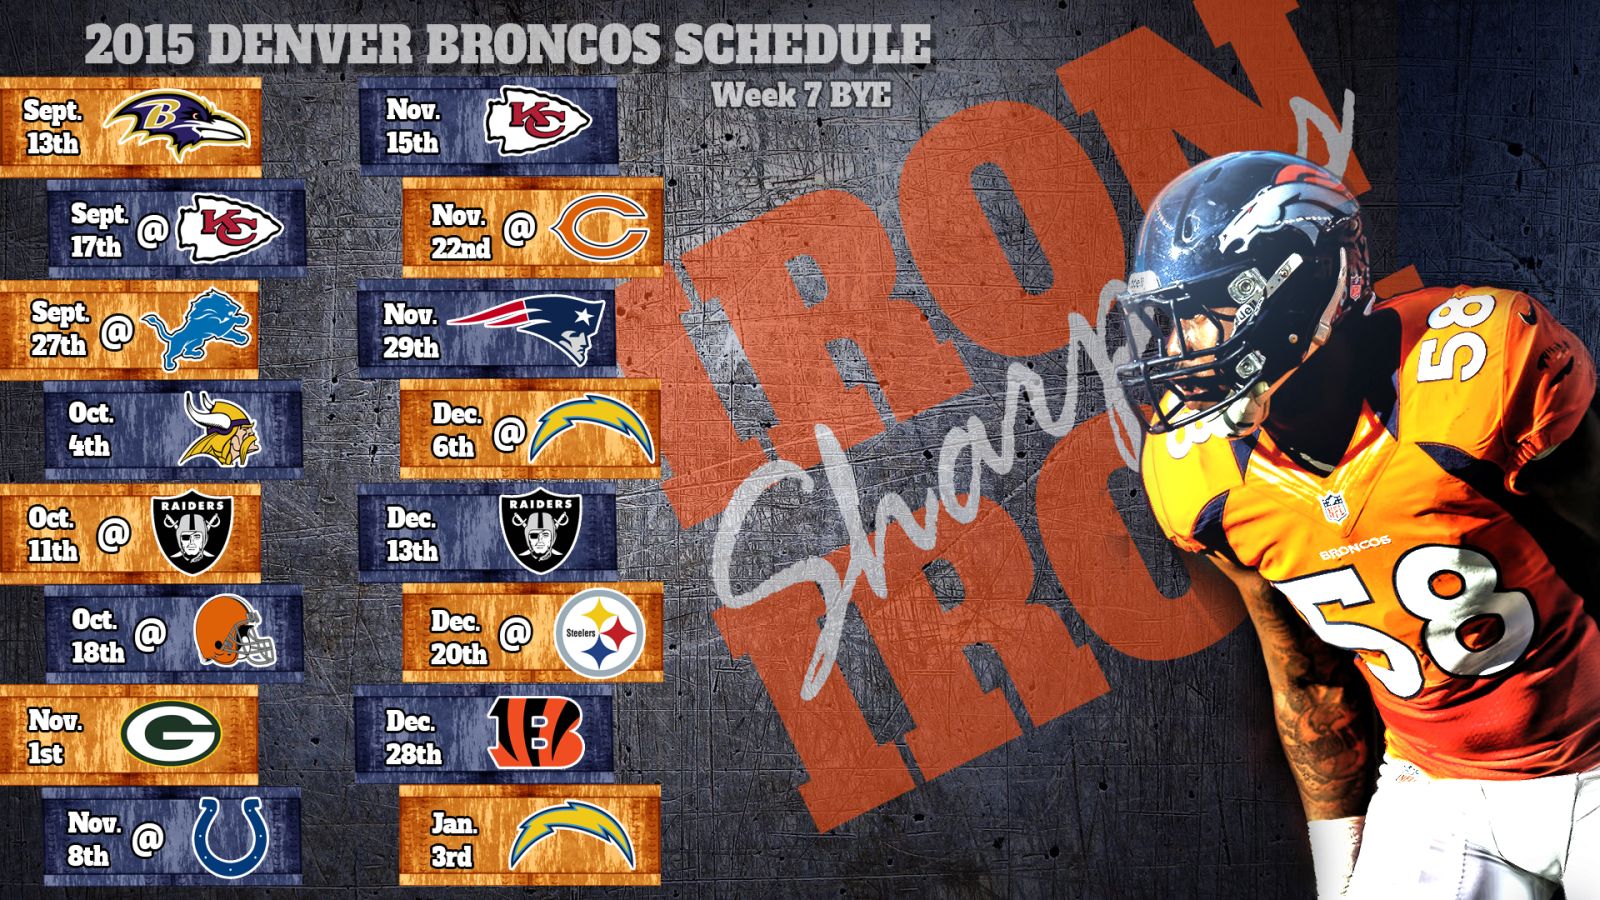 So who/where is our guy who designs those awesome Pats schedules ...